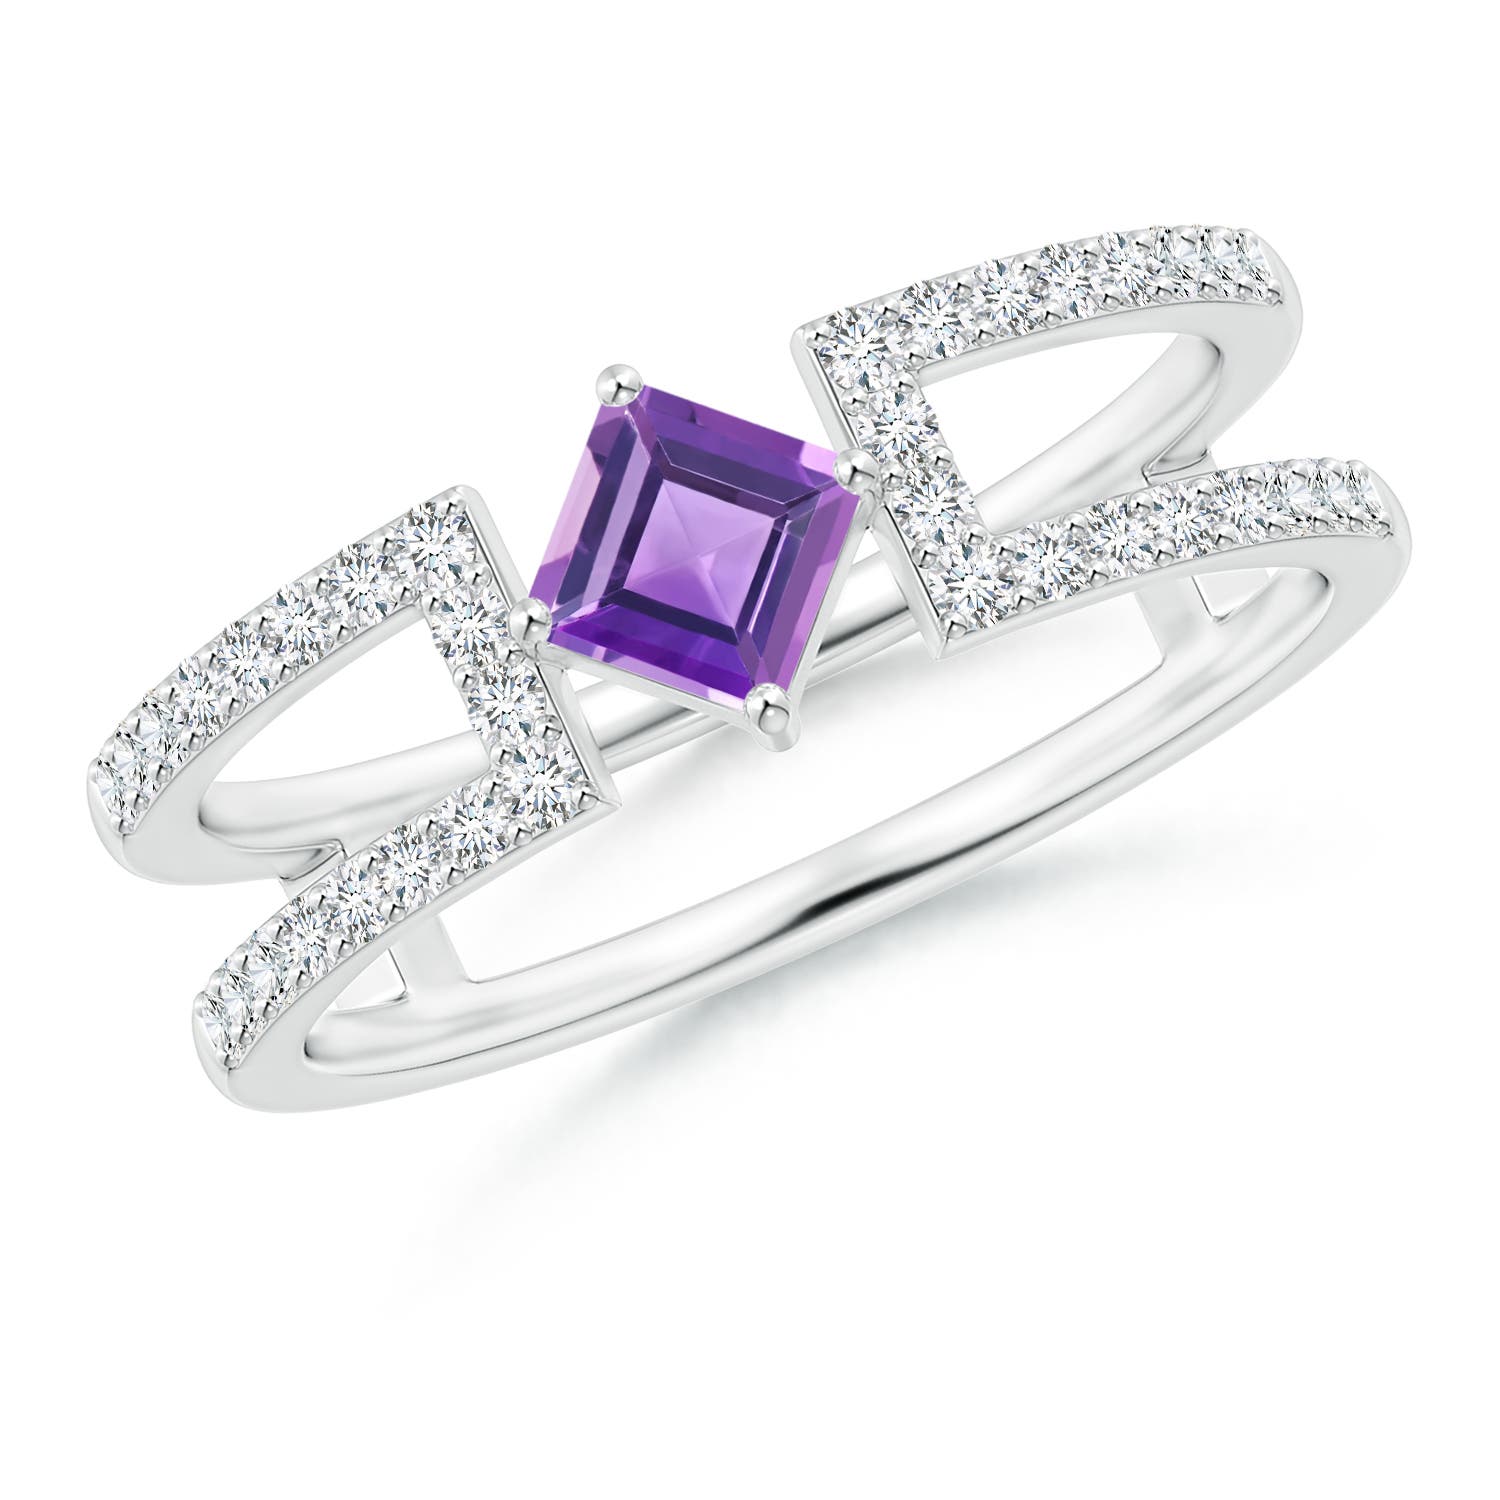 AA - Amethyst / 0.58 CT / 14 KT White Gold